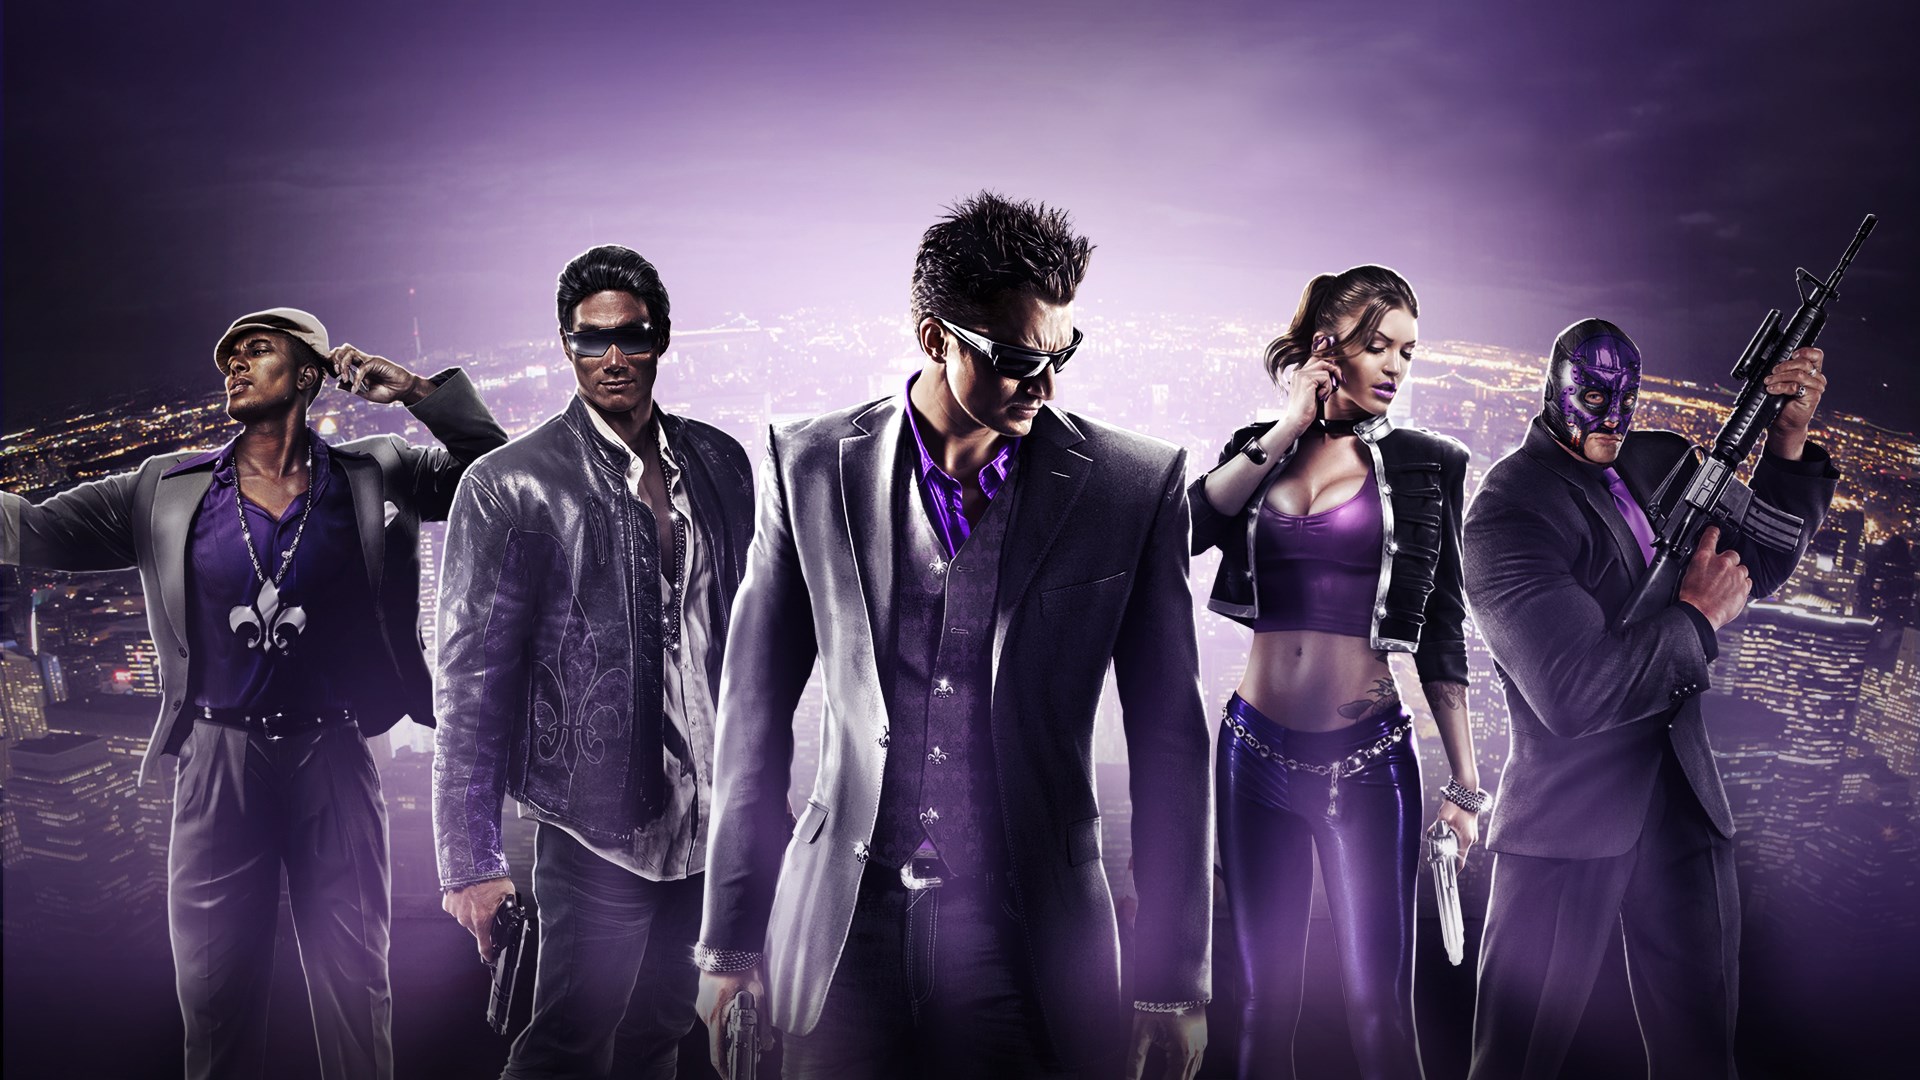 saints row the third remastered download free